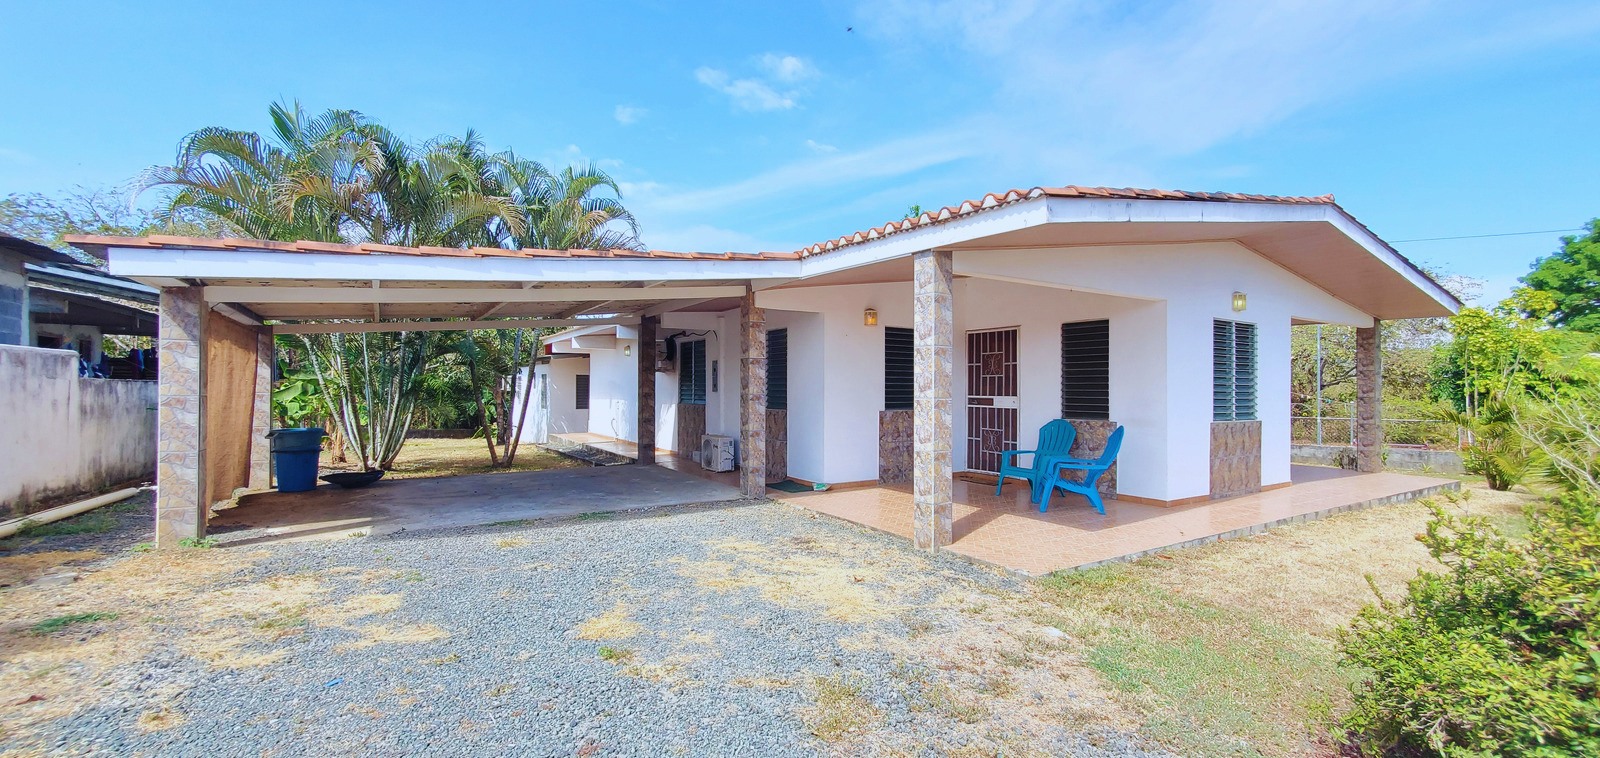 Investment or Income Property in Pedasi, Panama - 4 Bedroom Home - Property ID PLS-18565